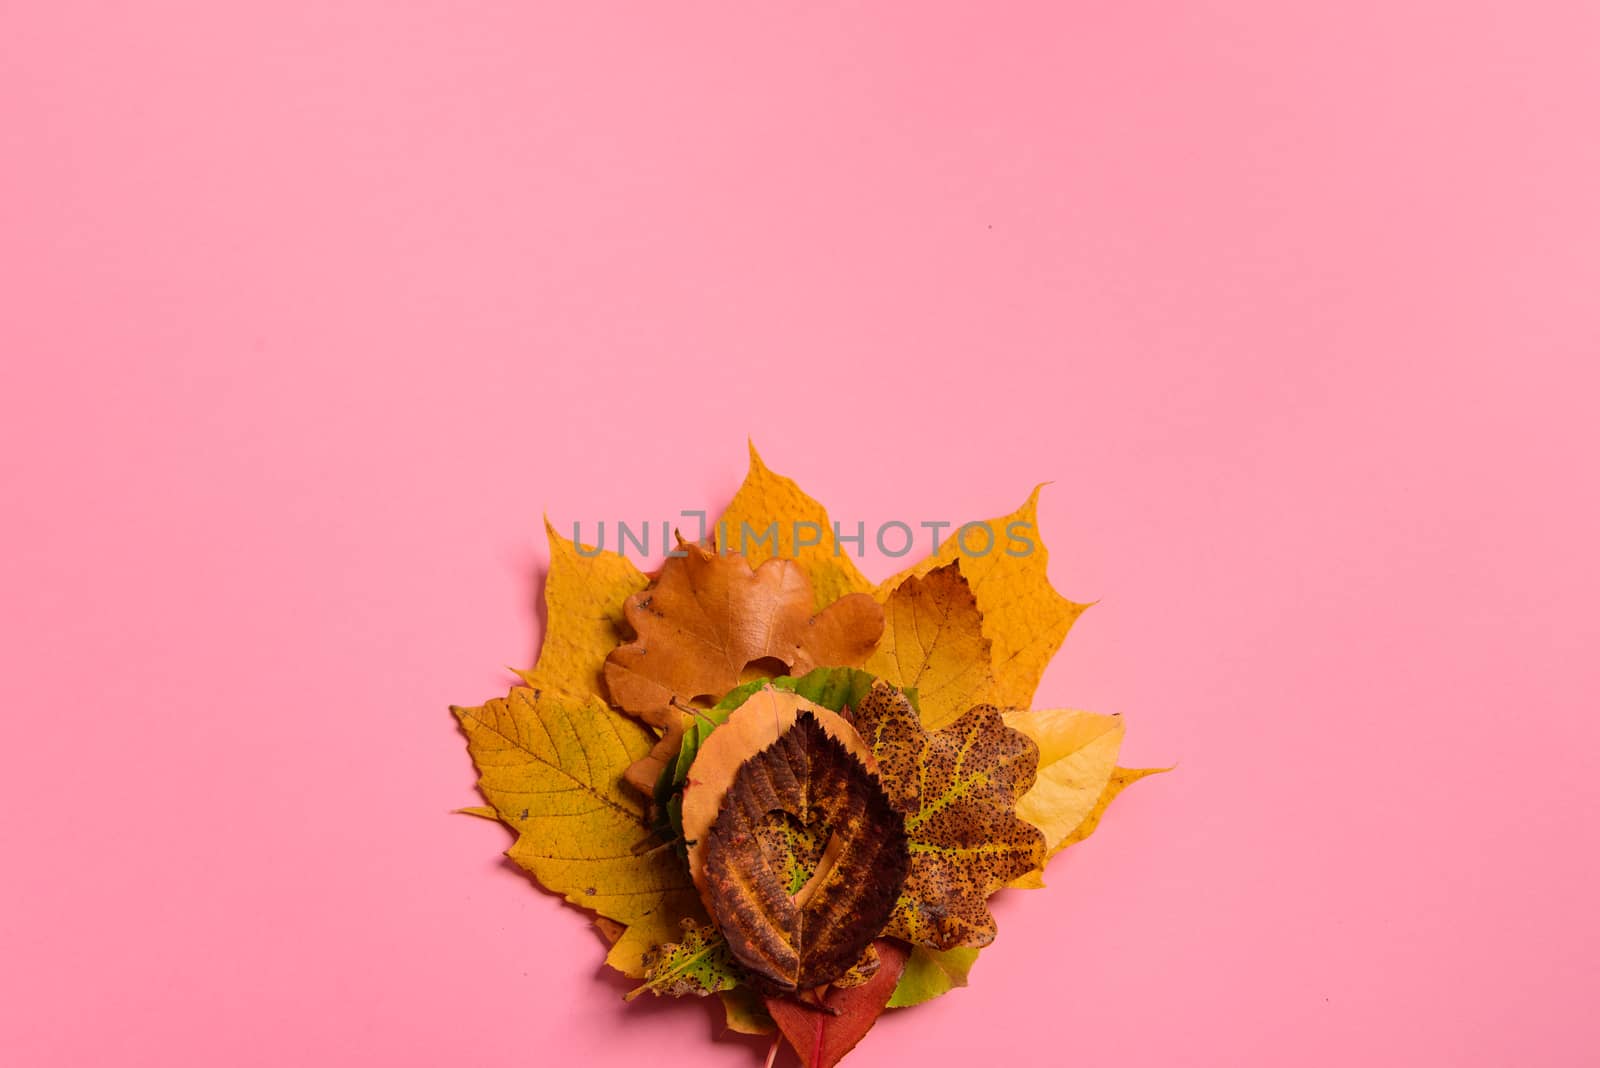 Background group autumn orange, green, yellow and brown leaves. with the heart shape cut out in the middle on pink background. Studio shoot. View from above. Horizontal orientation. Copy space.